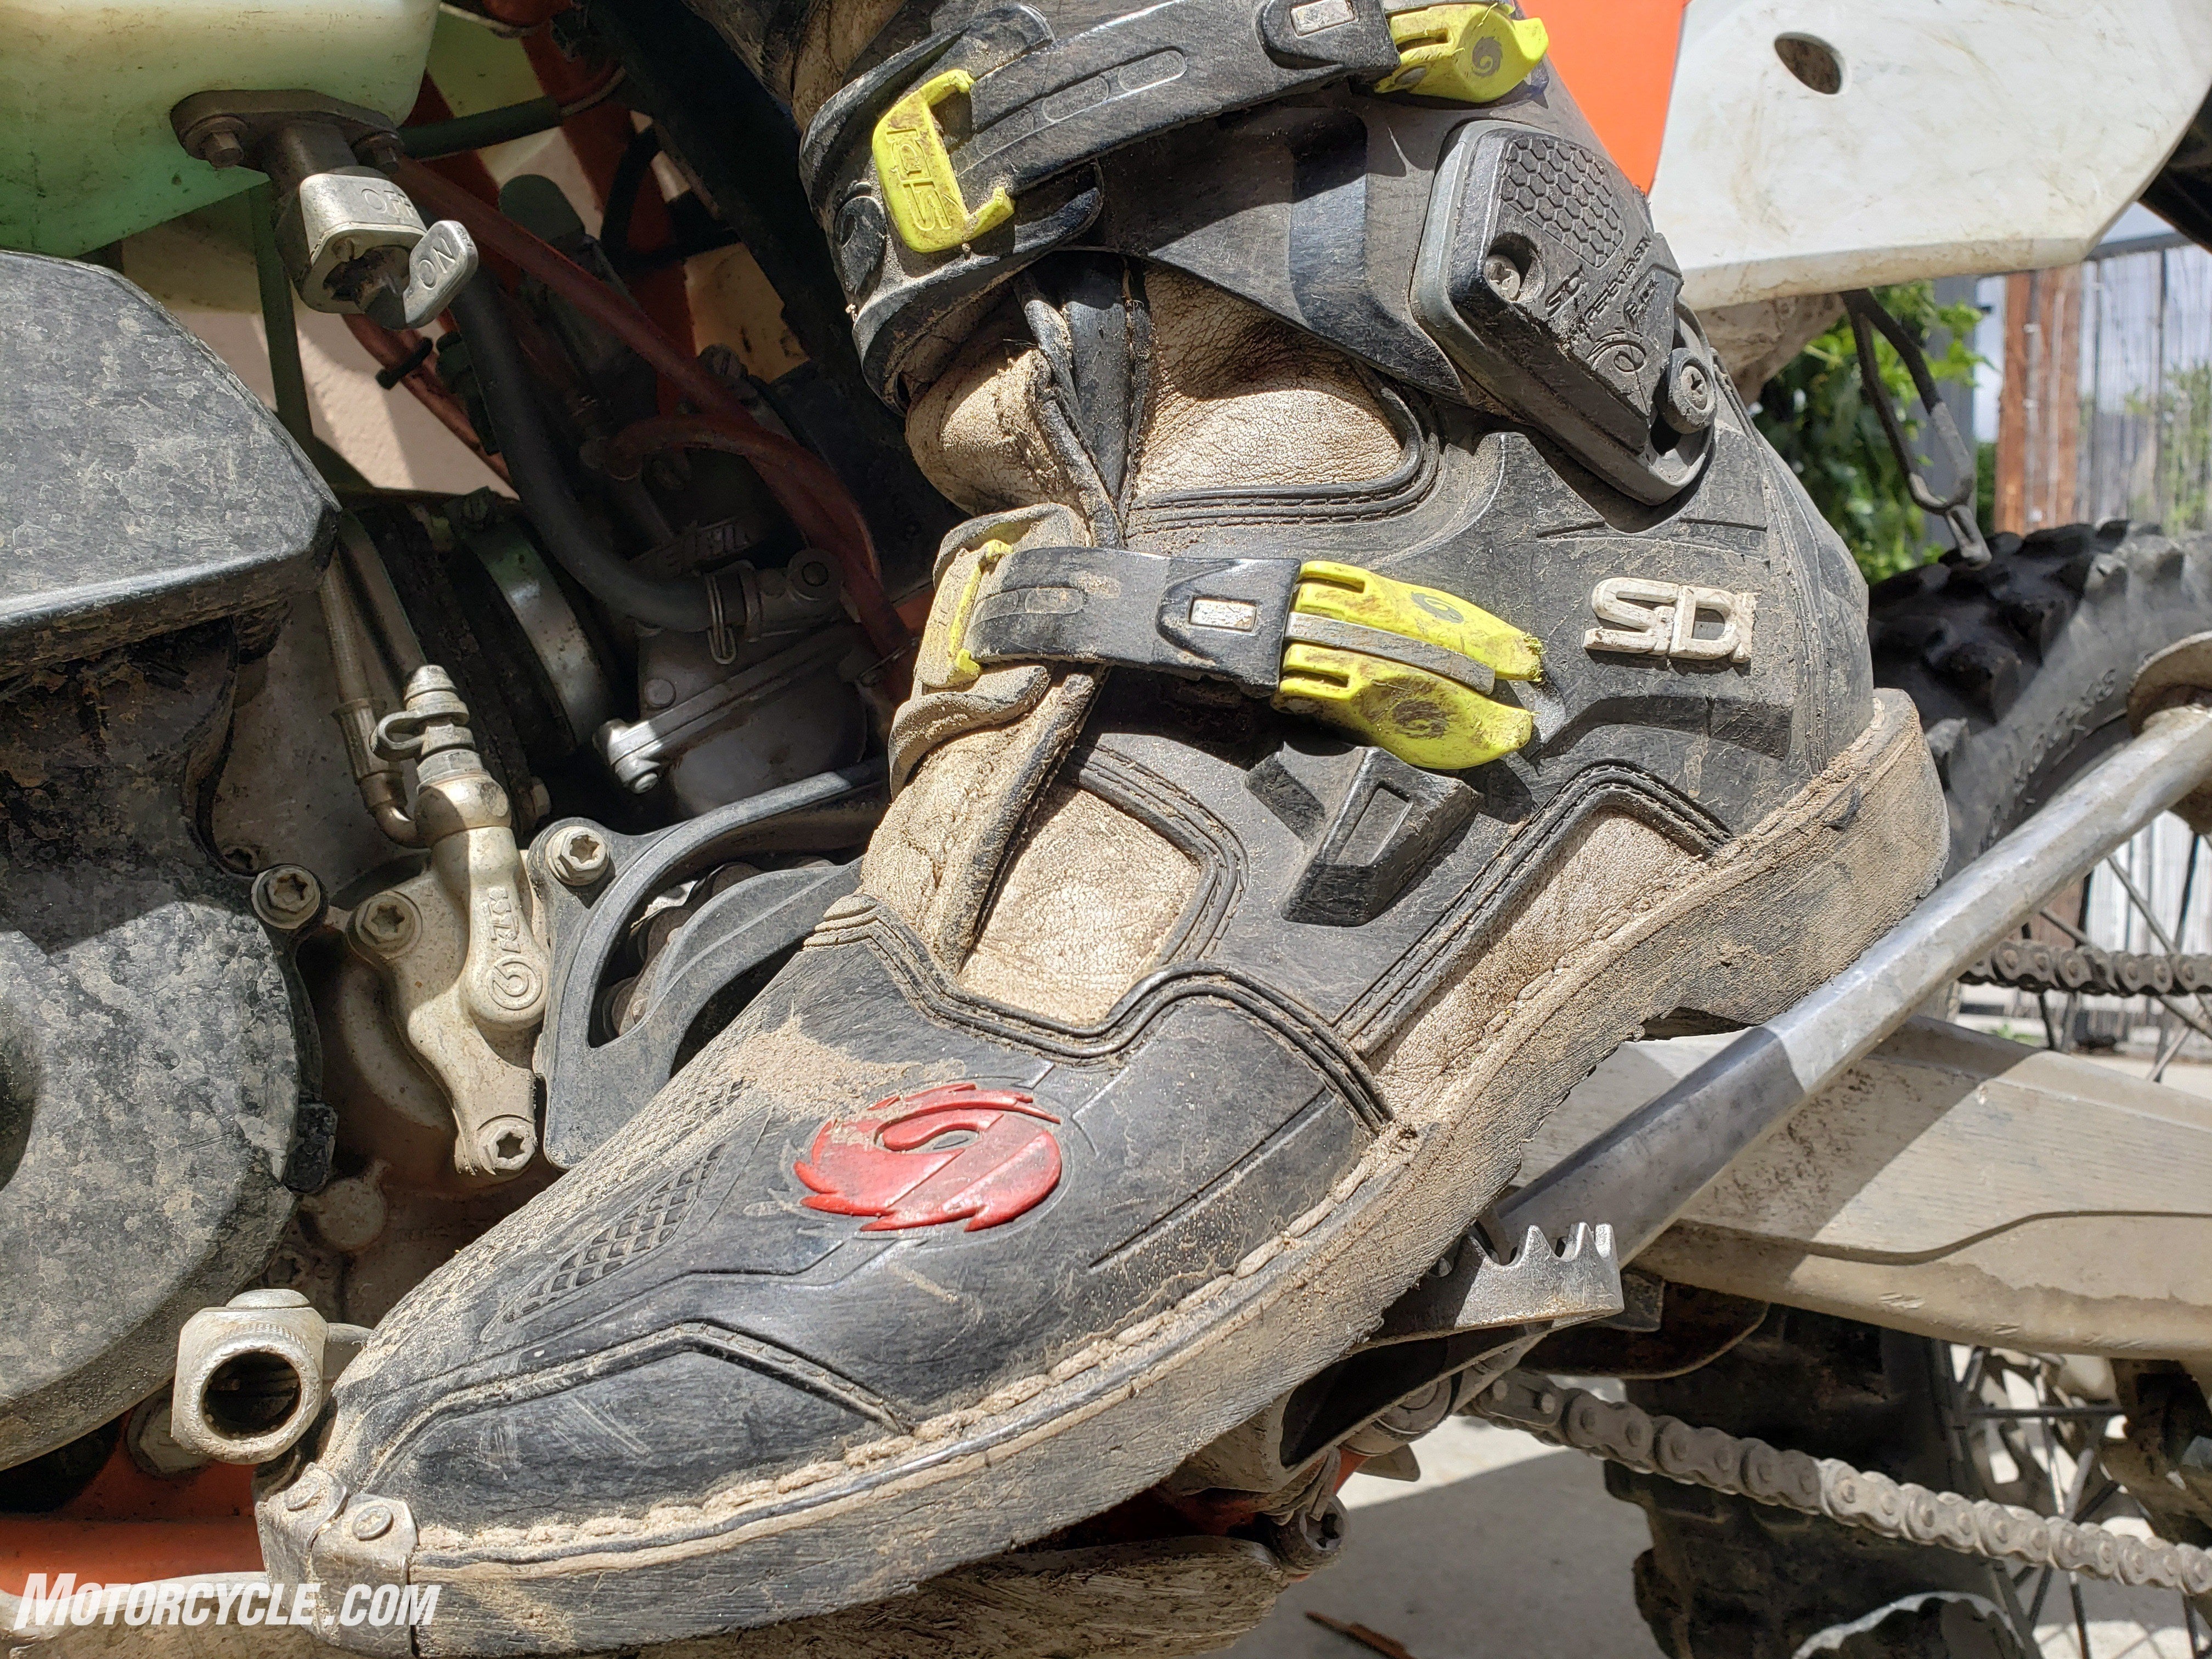 Sidi Crossfire 3 boot review